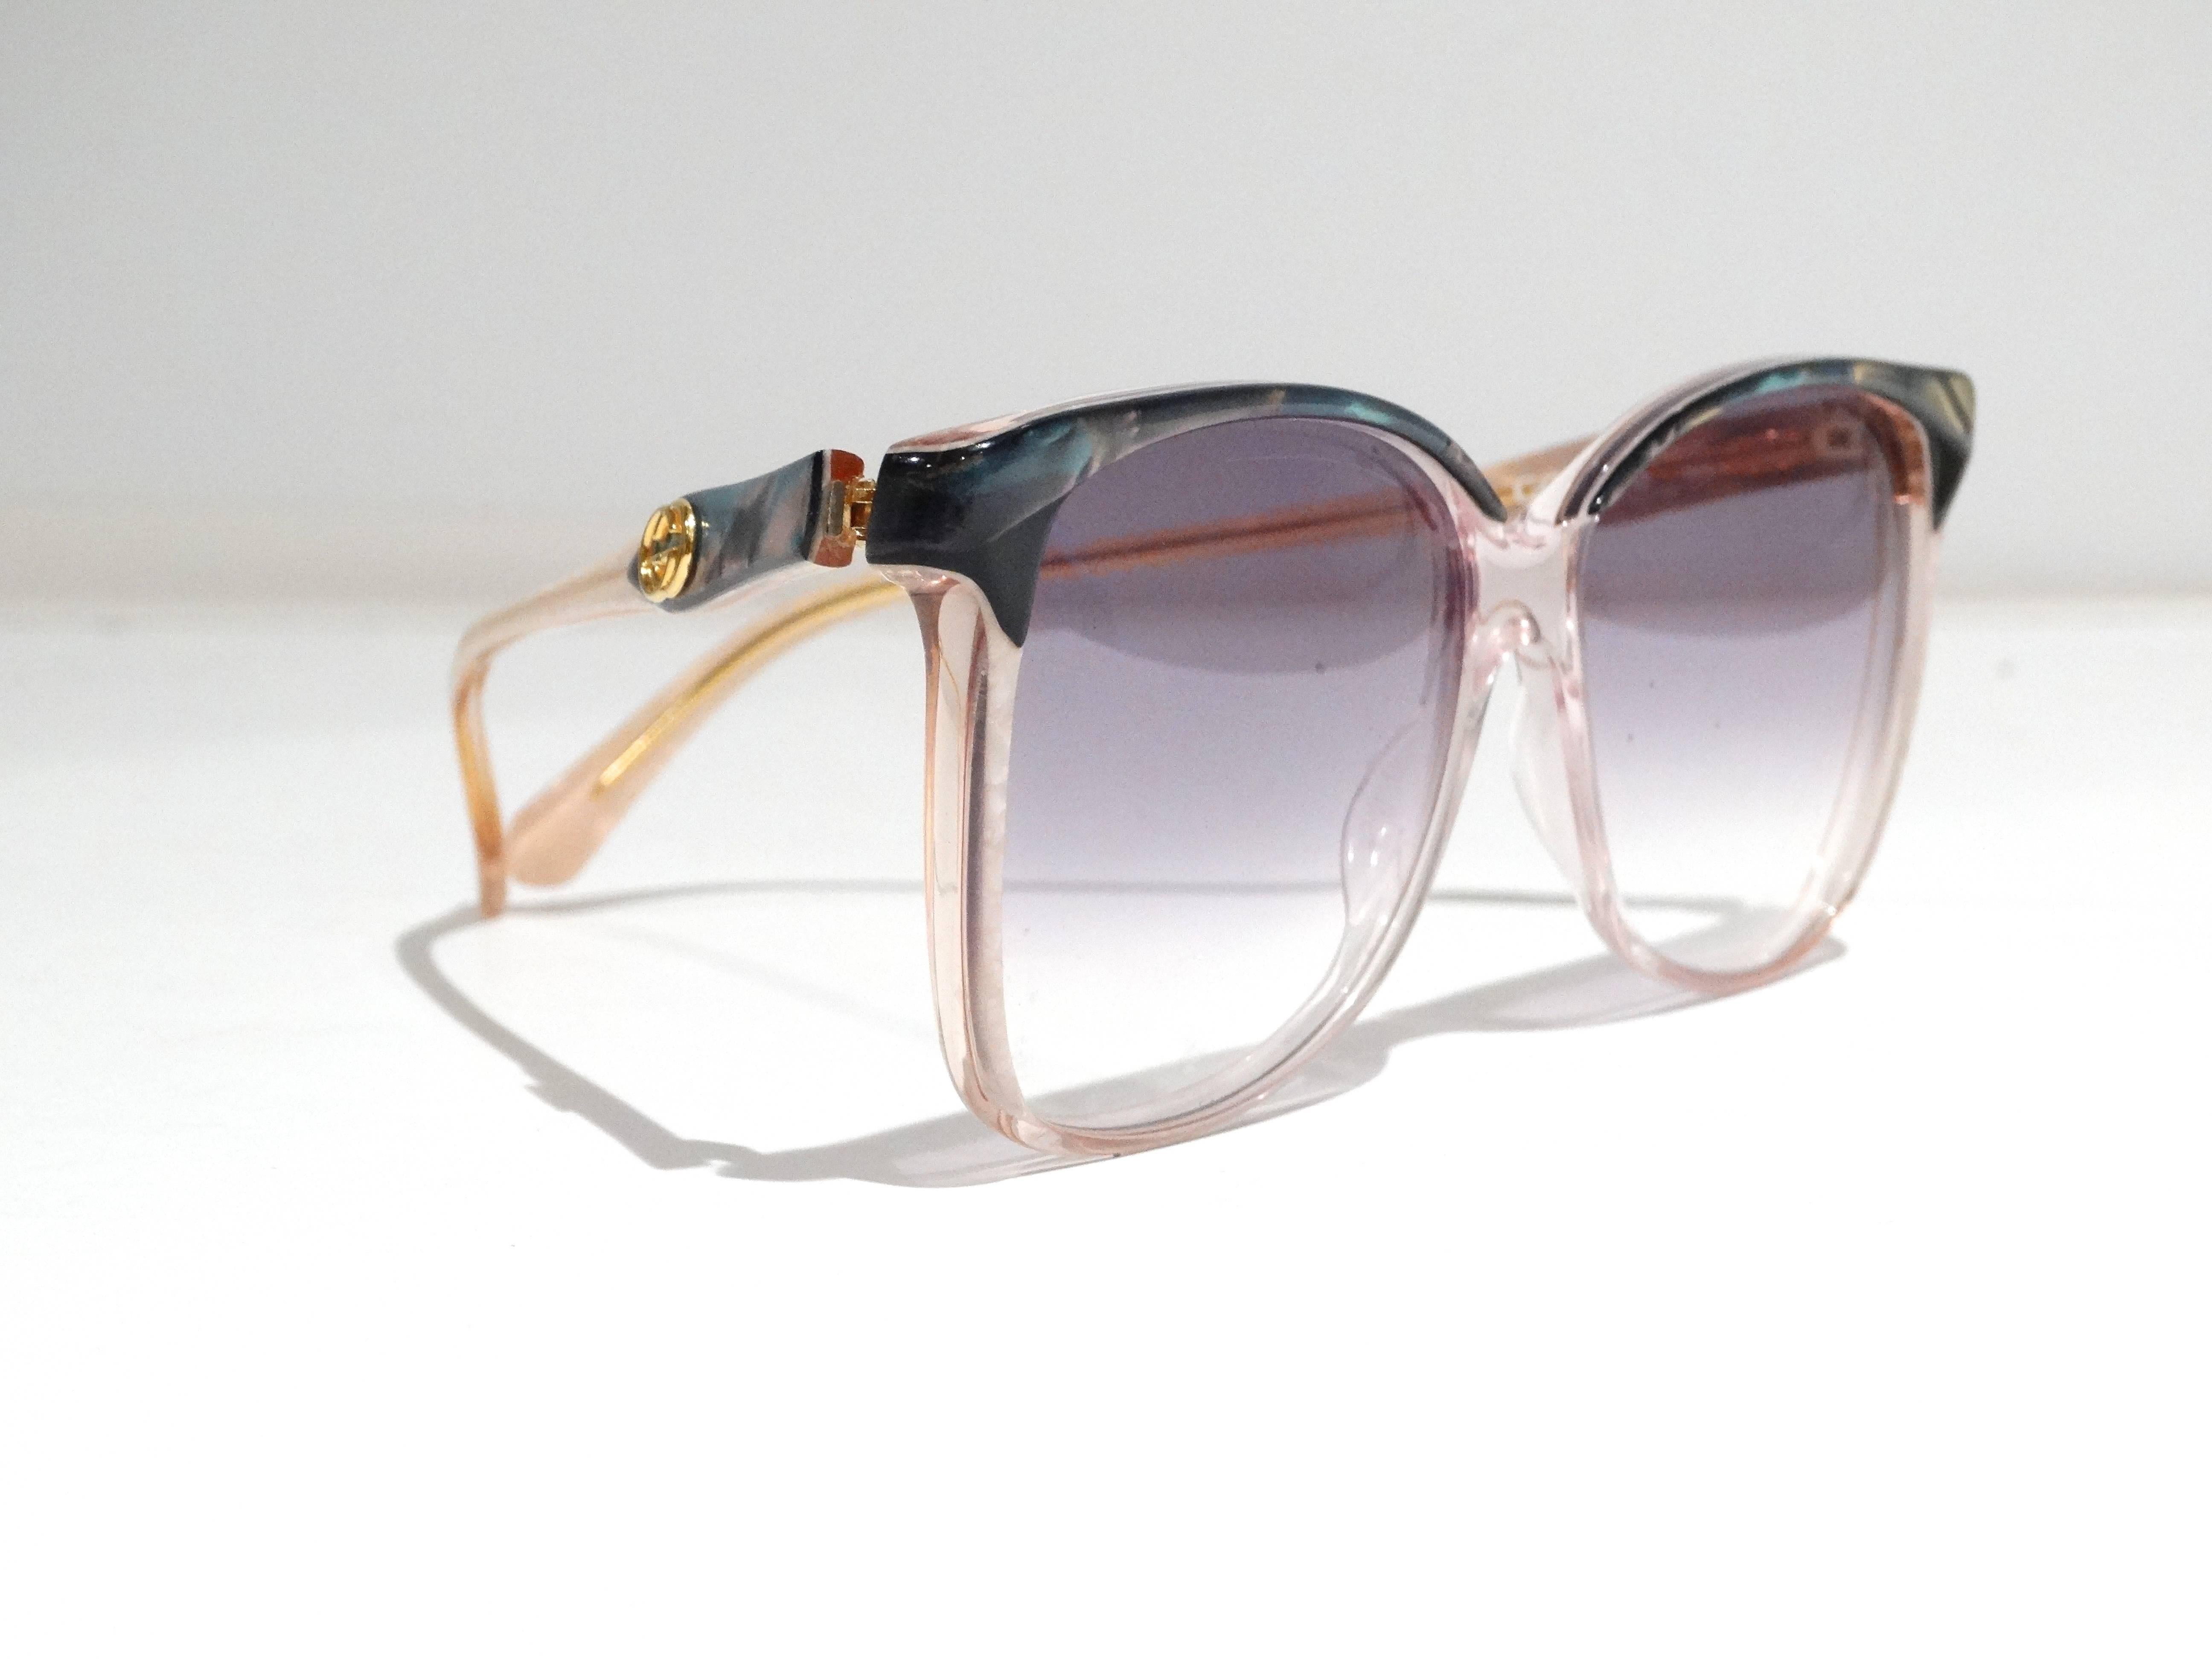 Stunning 1970's mother of pearl glasses by Gucci. Glasses feature an oversized frame with Gucci logos at sides. These have been re-lensed with a gradient sunglass lens. Also included the original clear lenses and leather Gucci sunglass sleeve.